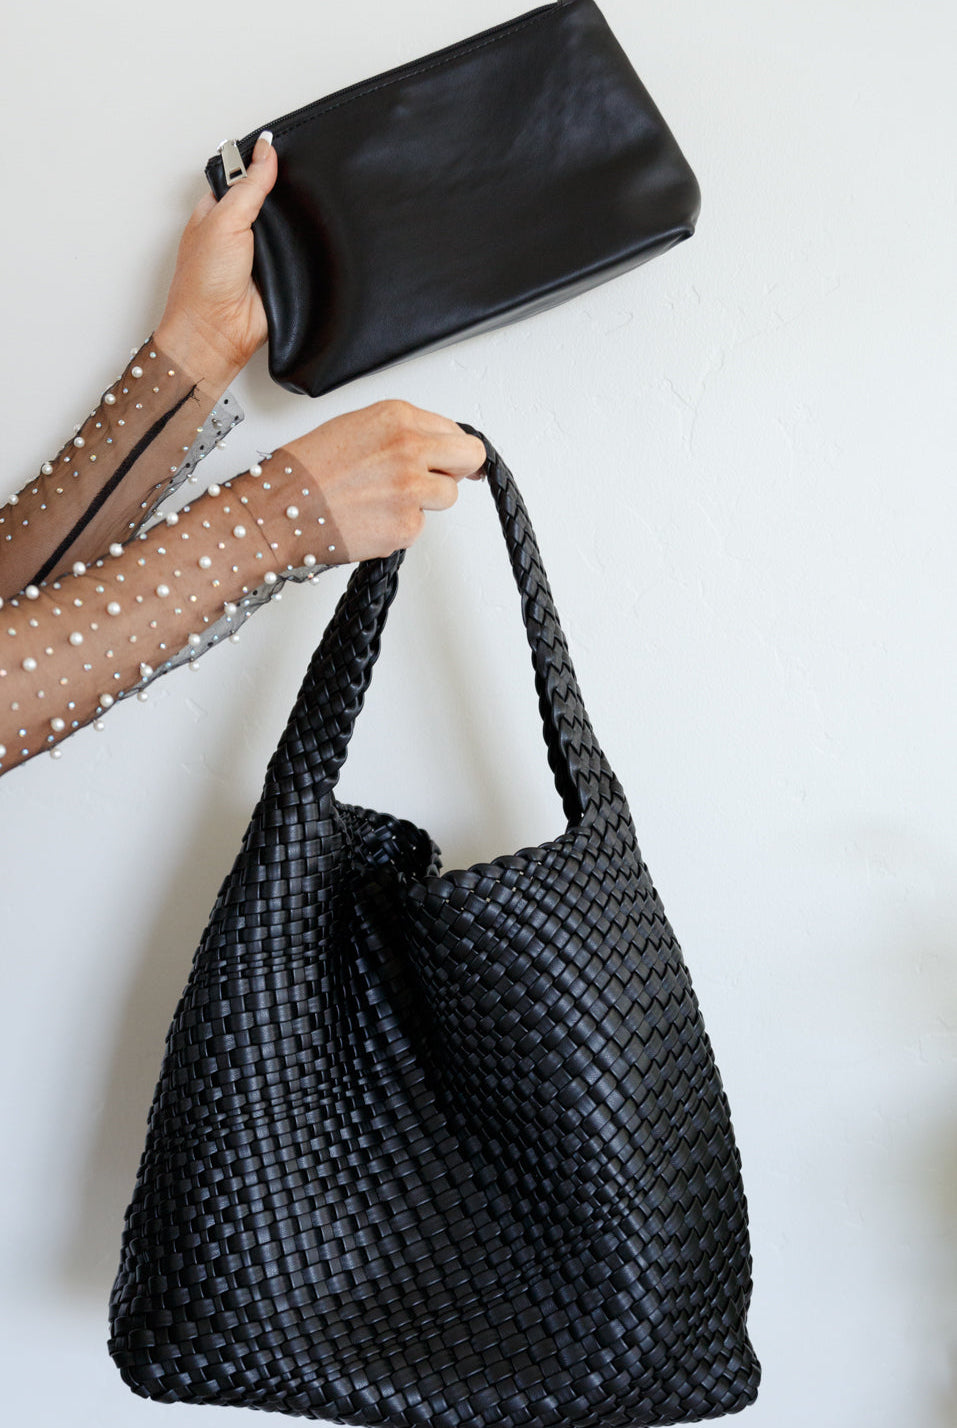 Woven and Worn Tote in Black-Accessories- Simply Simpson's Boutique is a Women's Online Fashion Boutique Located in Jupiter, Florida